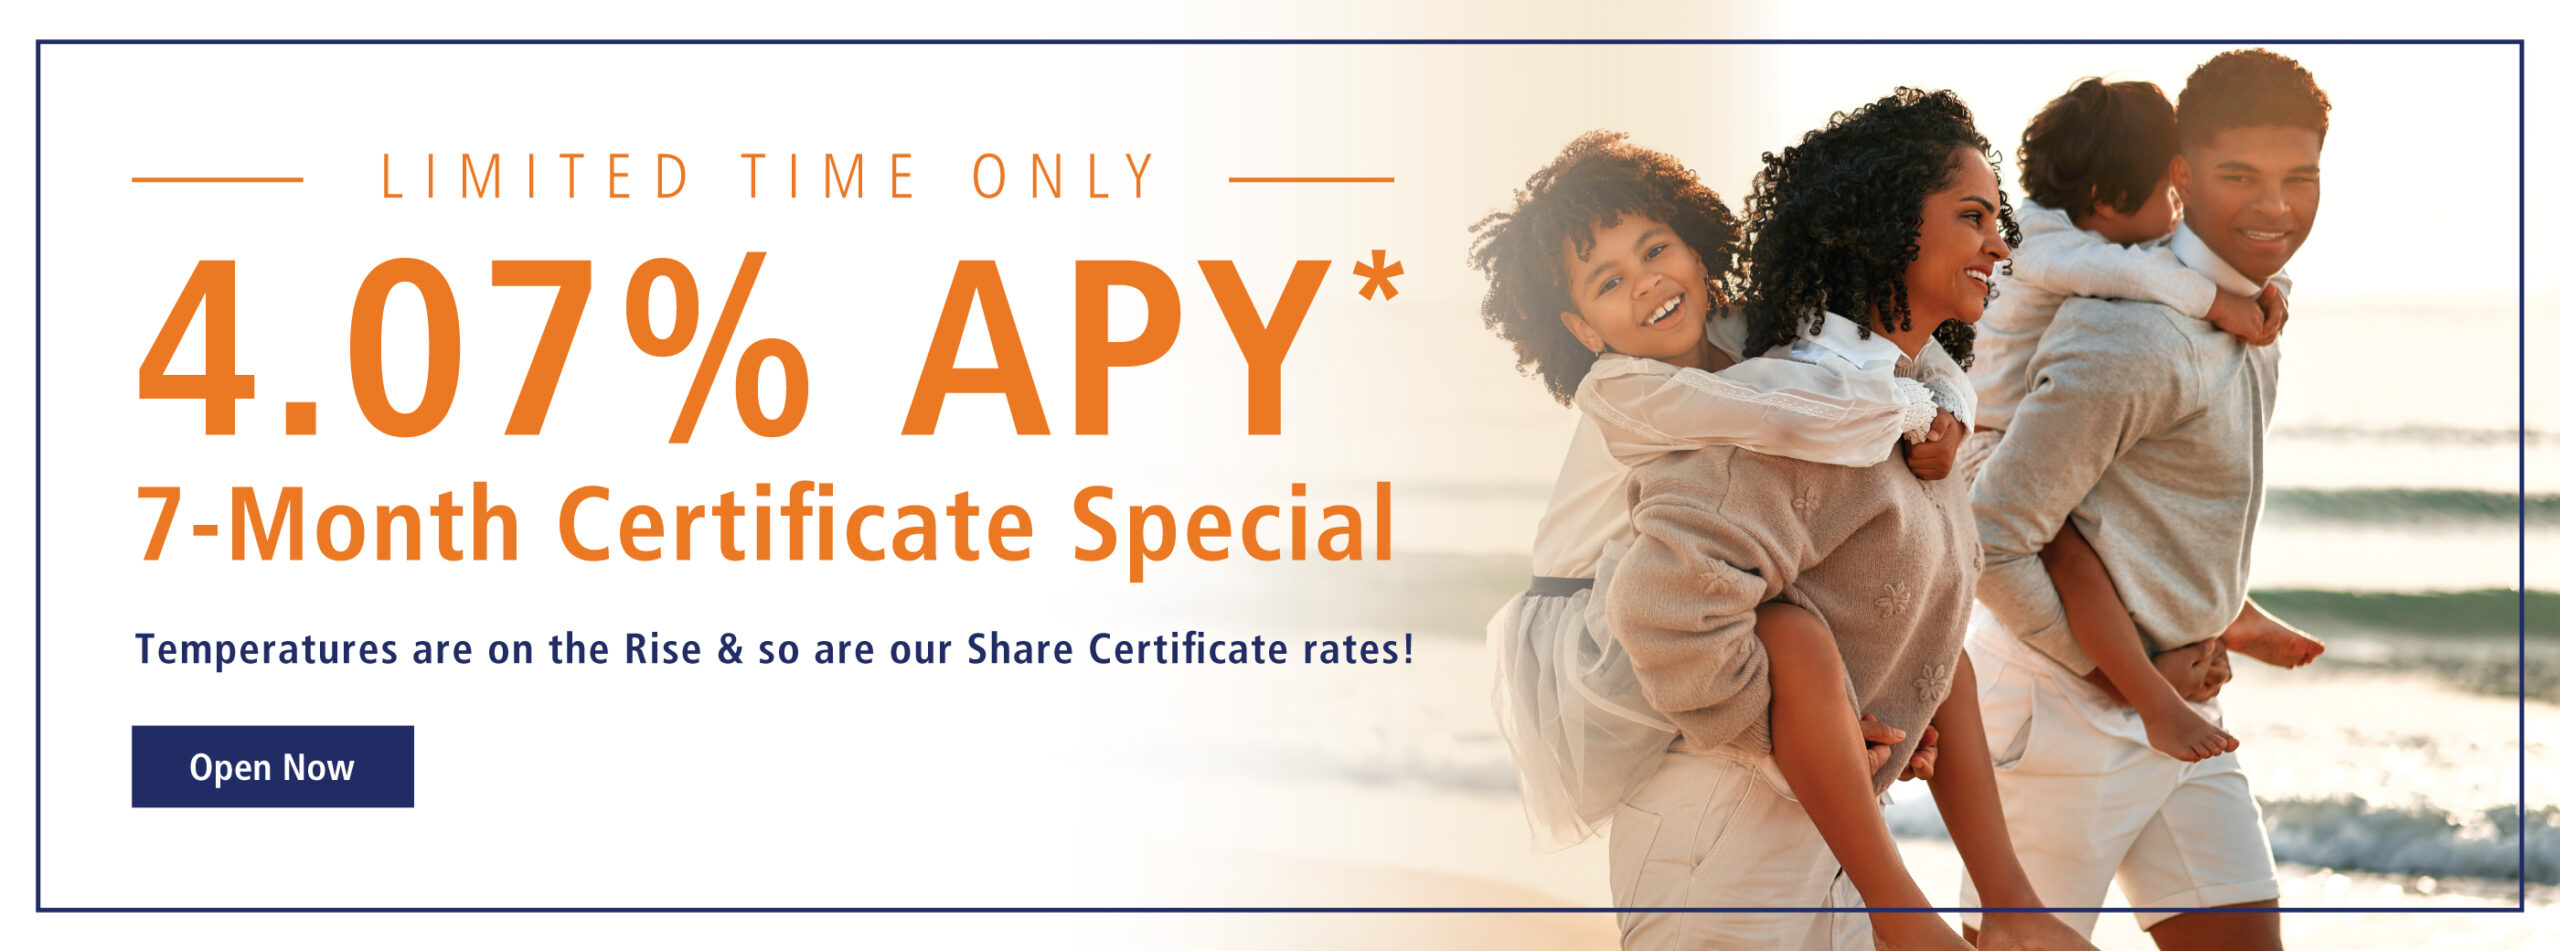 4.07% APY* 7 Month Certificate Special. Click to Open Now